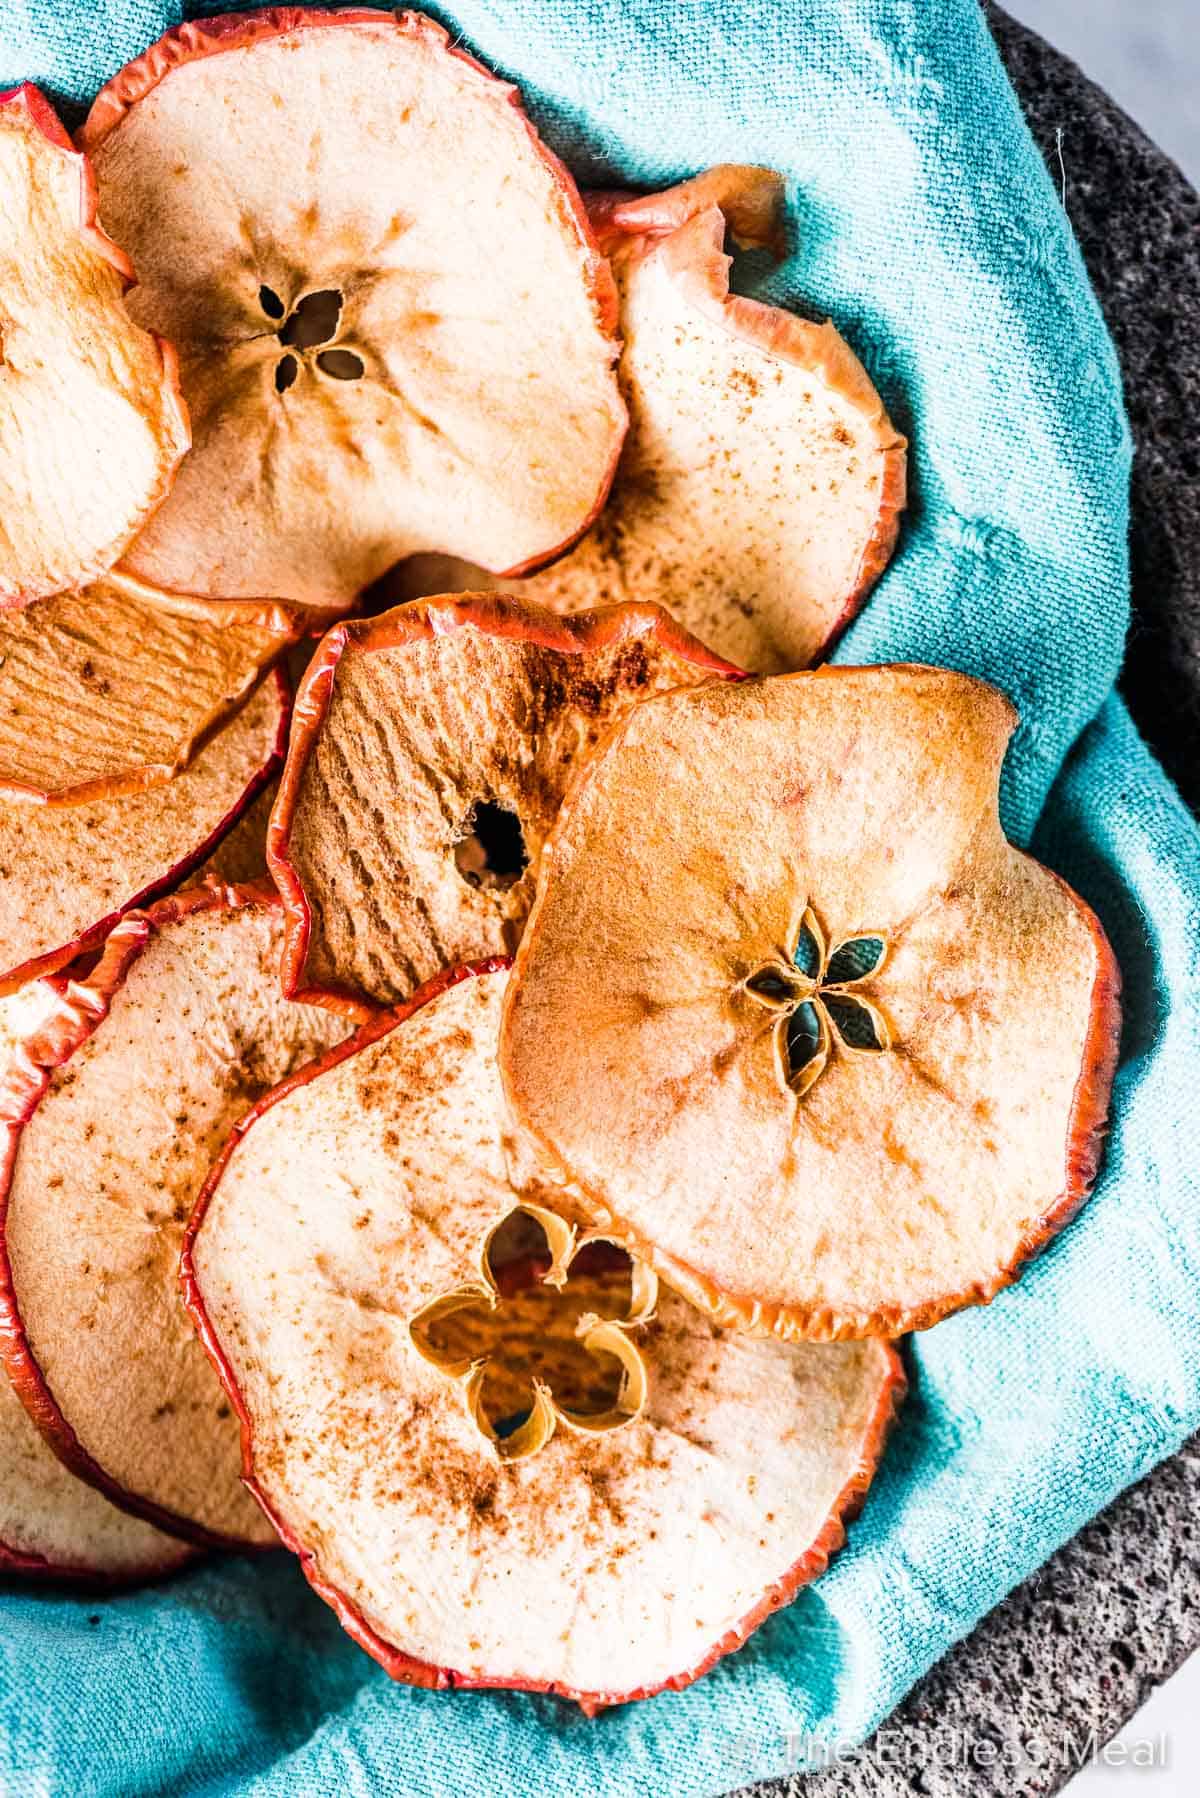 Baked apple chips in bowl lined with a blue cloth.